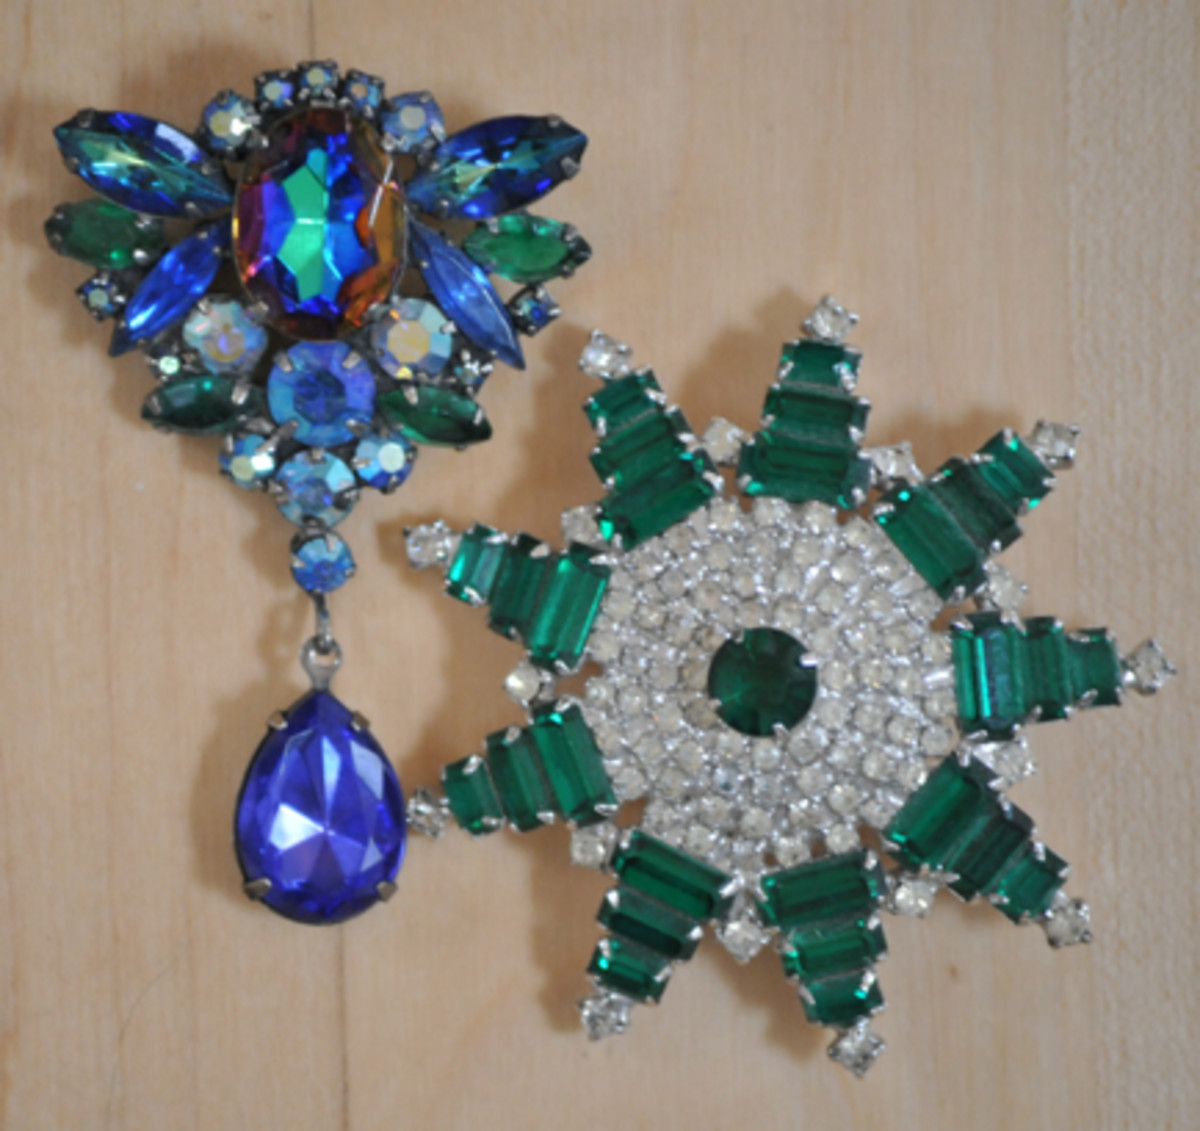  {Part of her costume jewelry collection. I love the bright blues.}